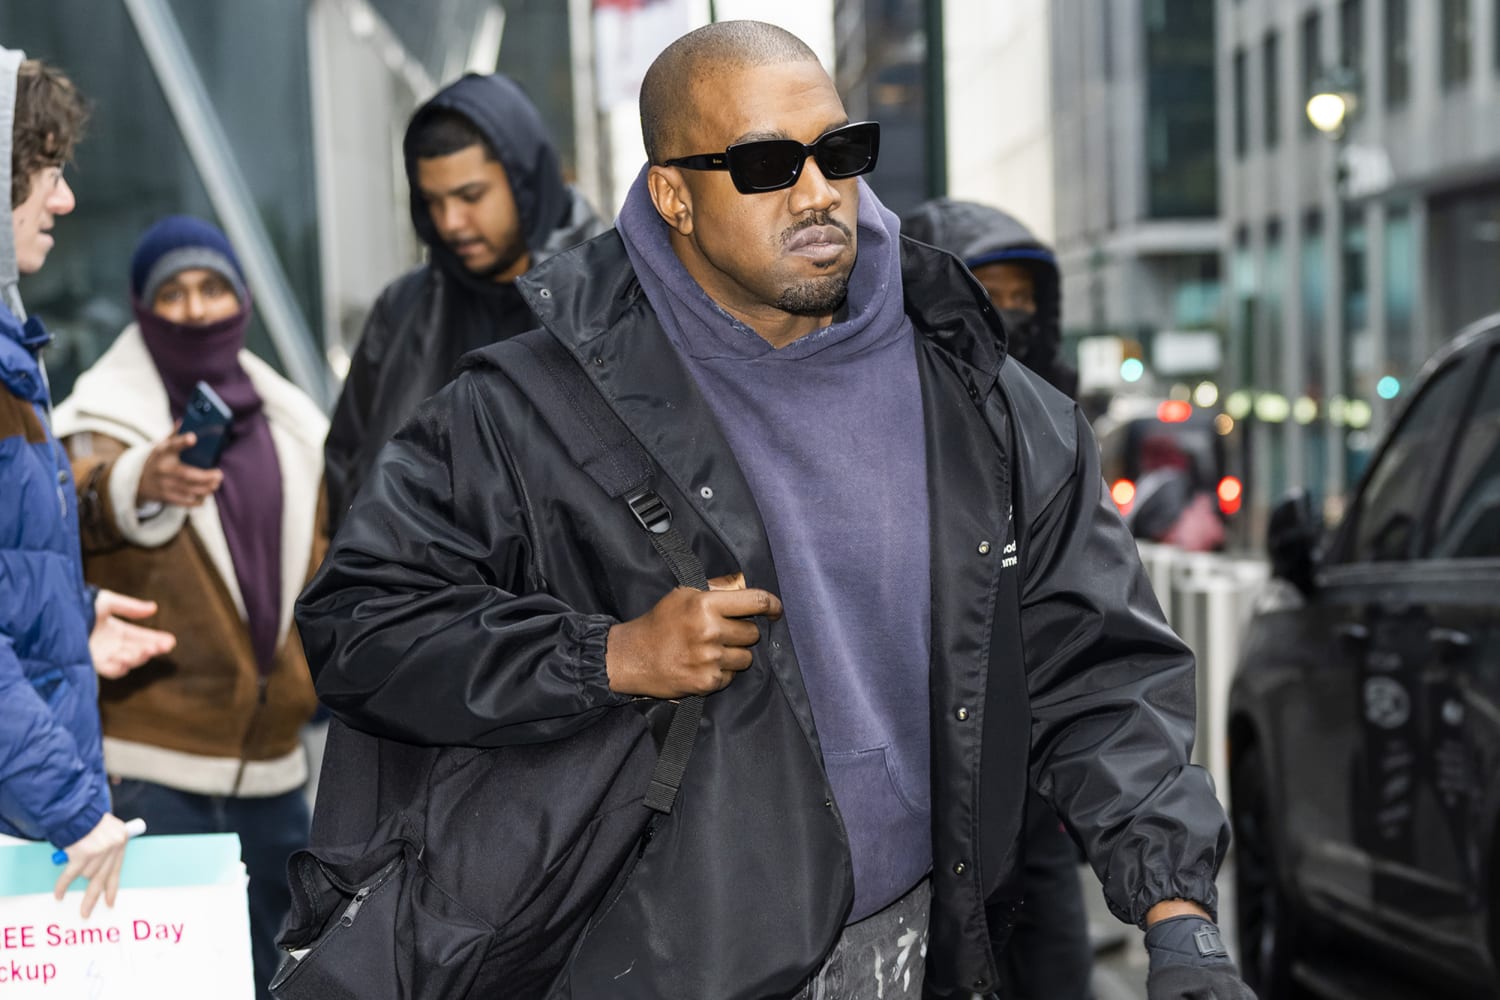 How that Kanye photo changed street style forever